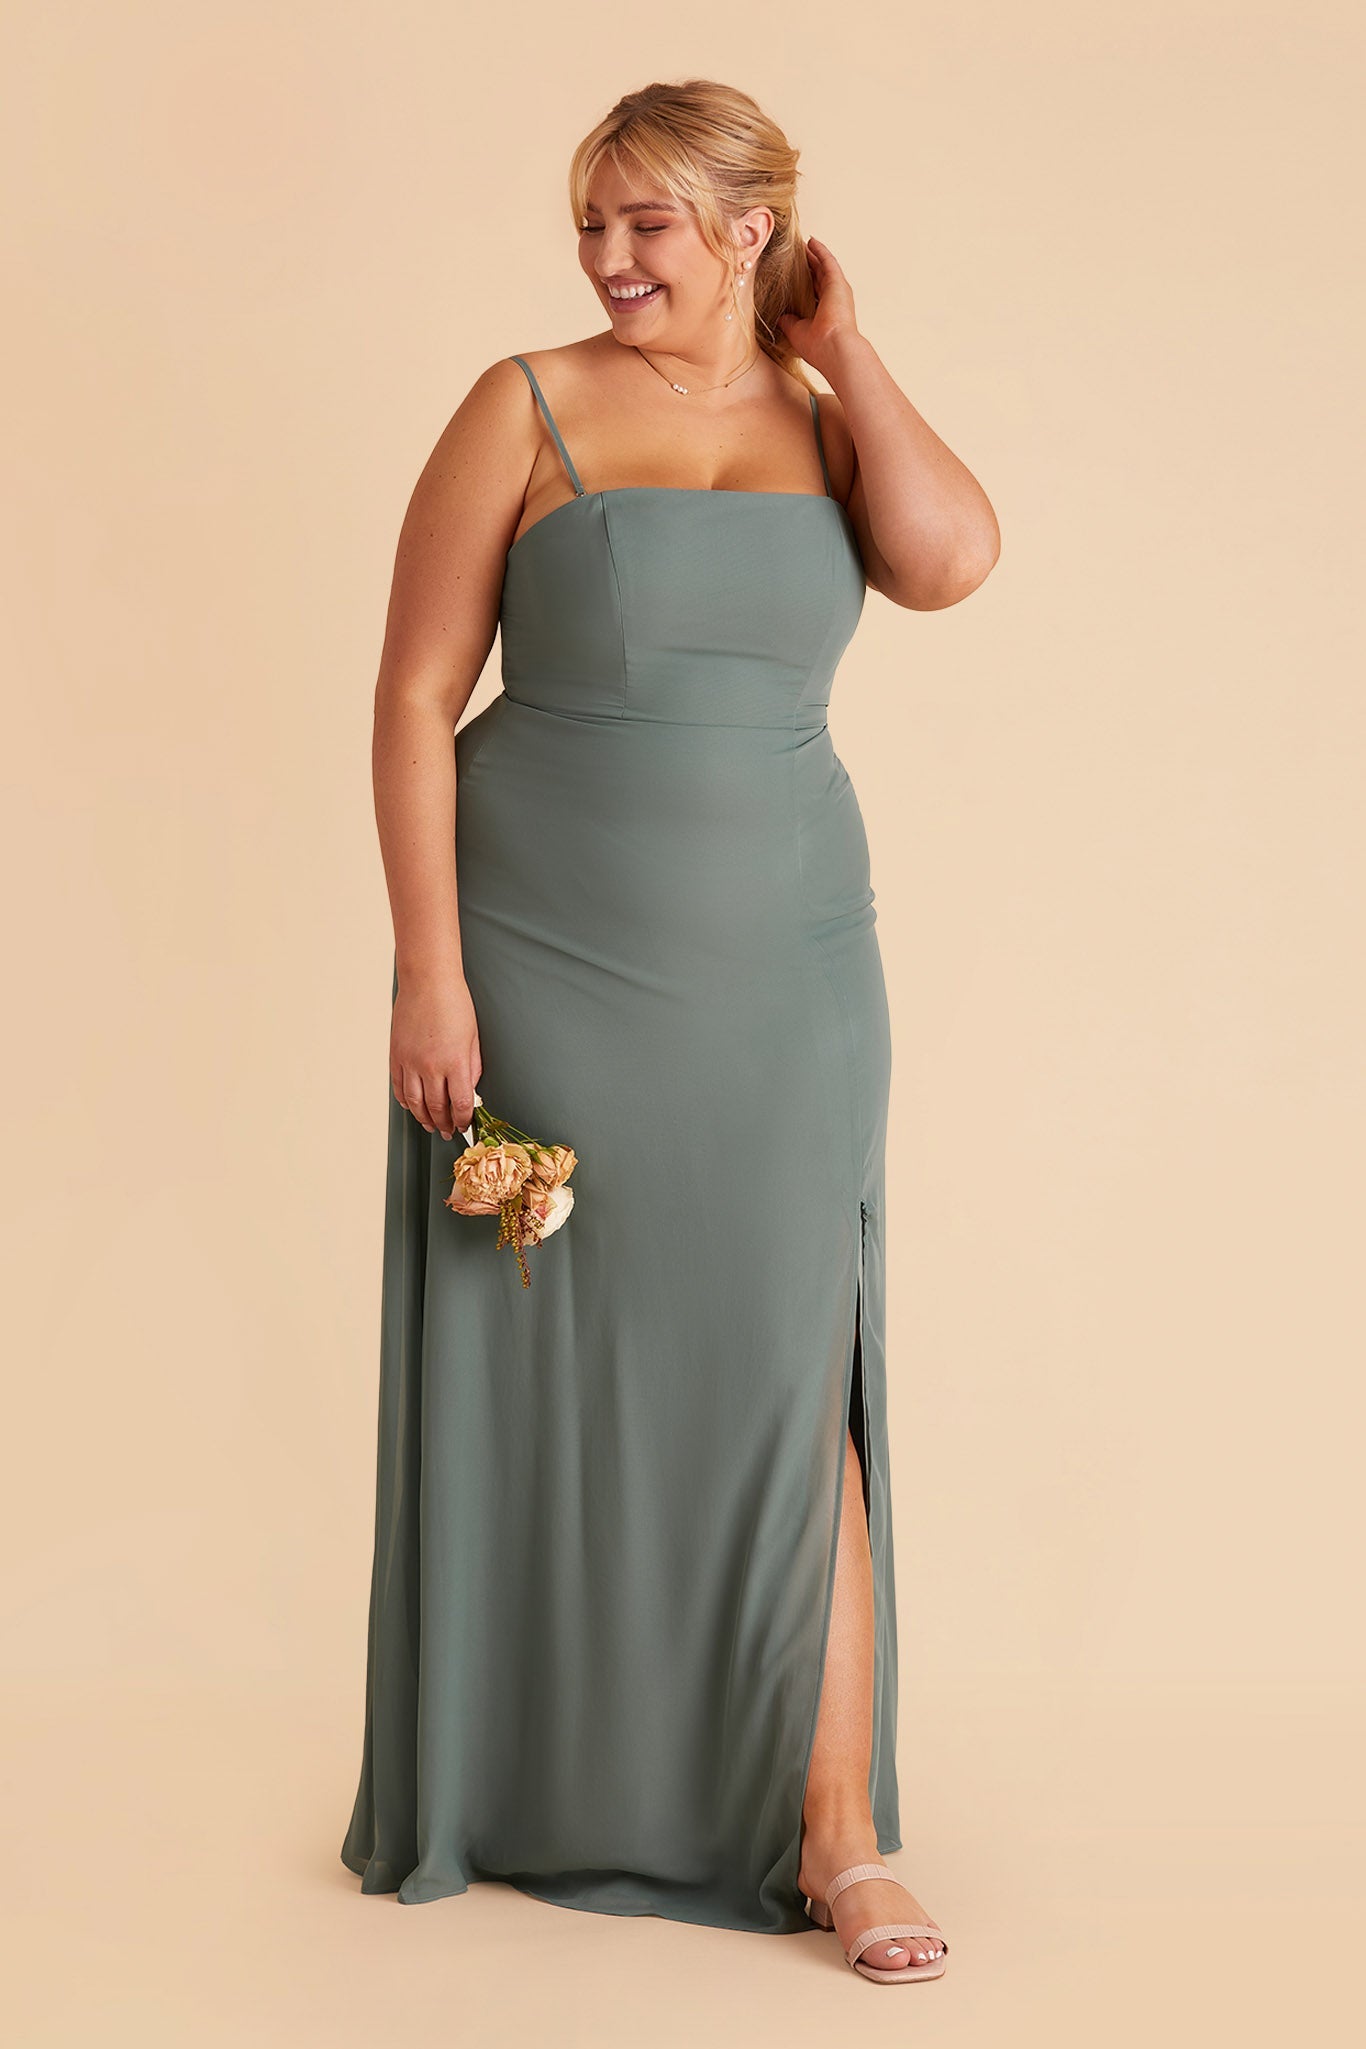 Chris plus size bridesmaid dress with slit in sea glass chiffon by Birdy Grey, front view